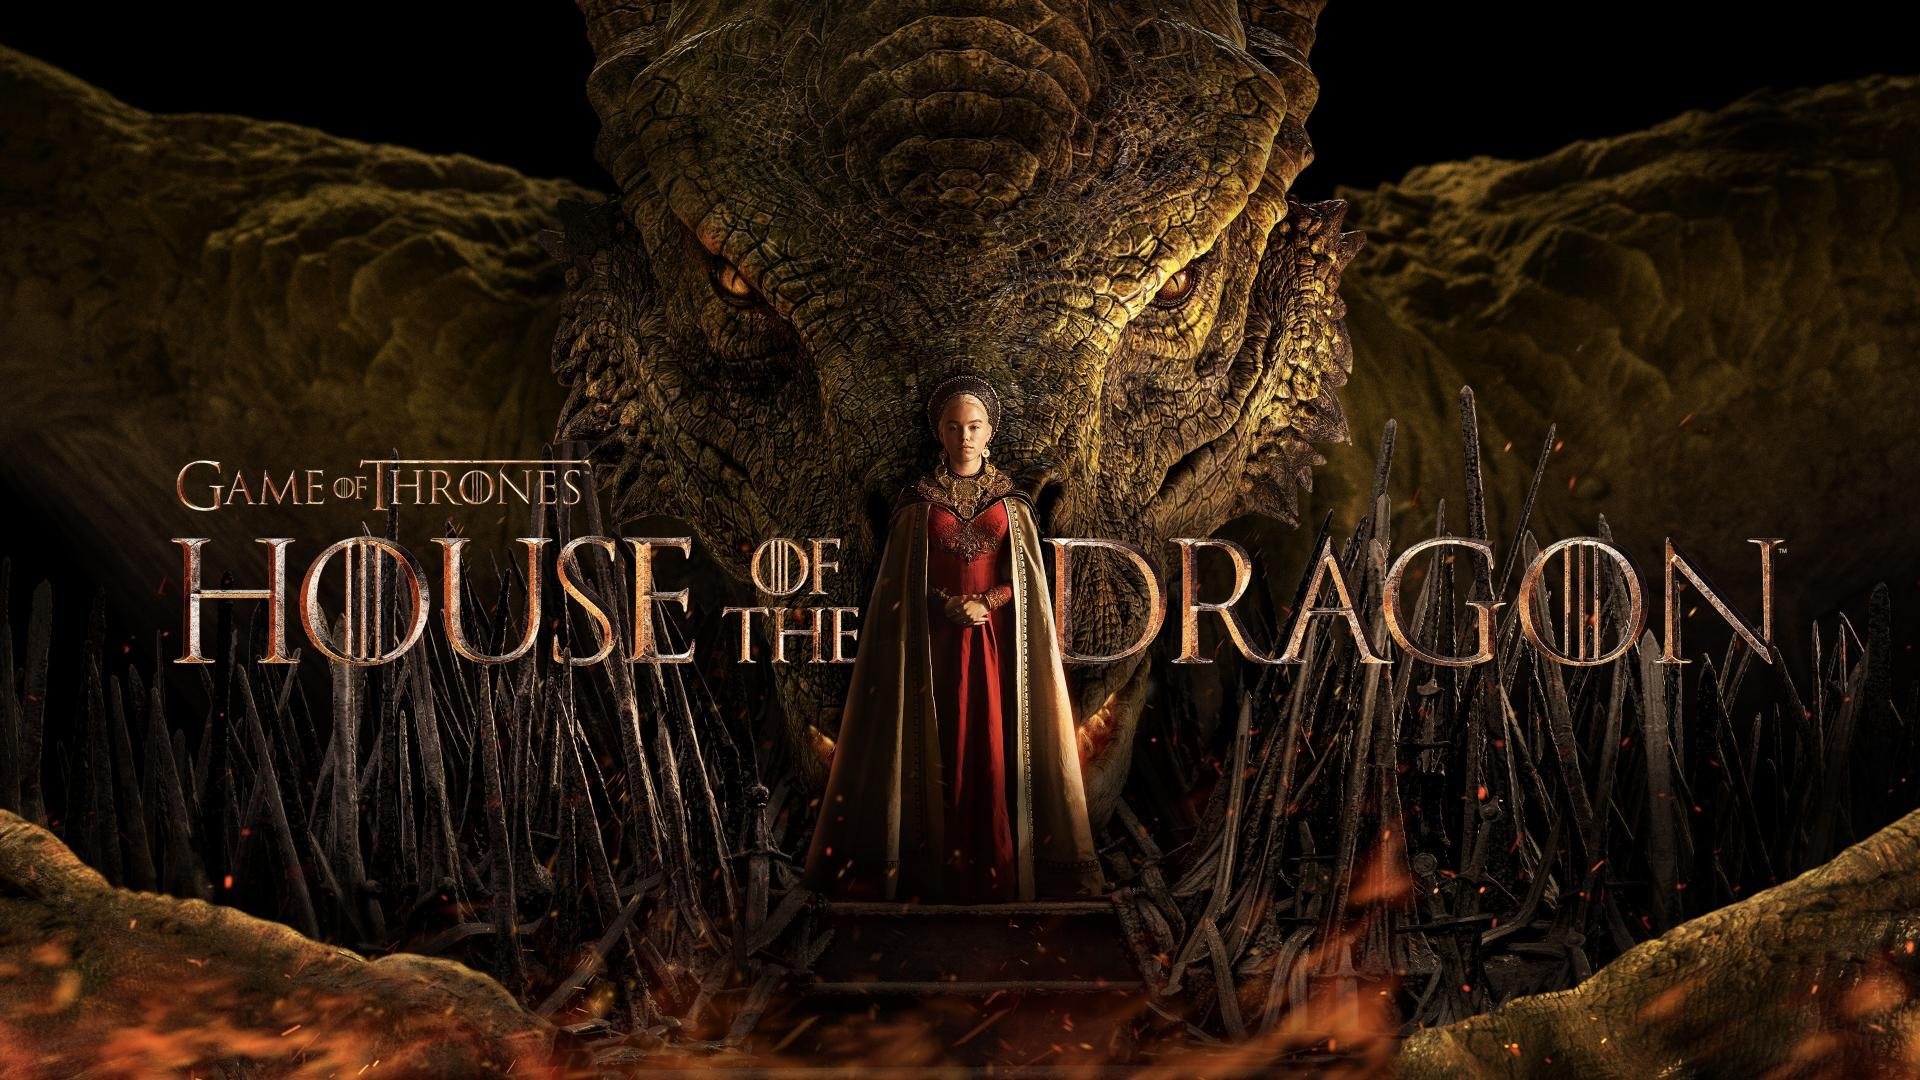 Watch House of the Dragon Streaming Online - Yidio